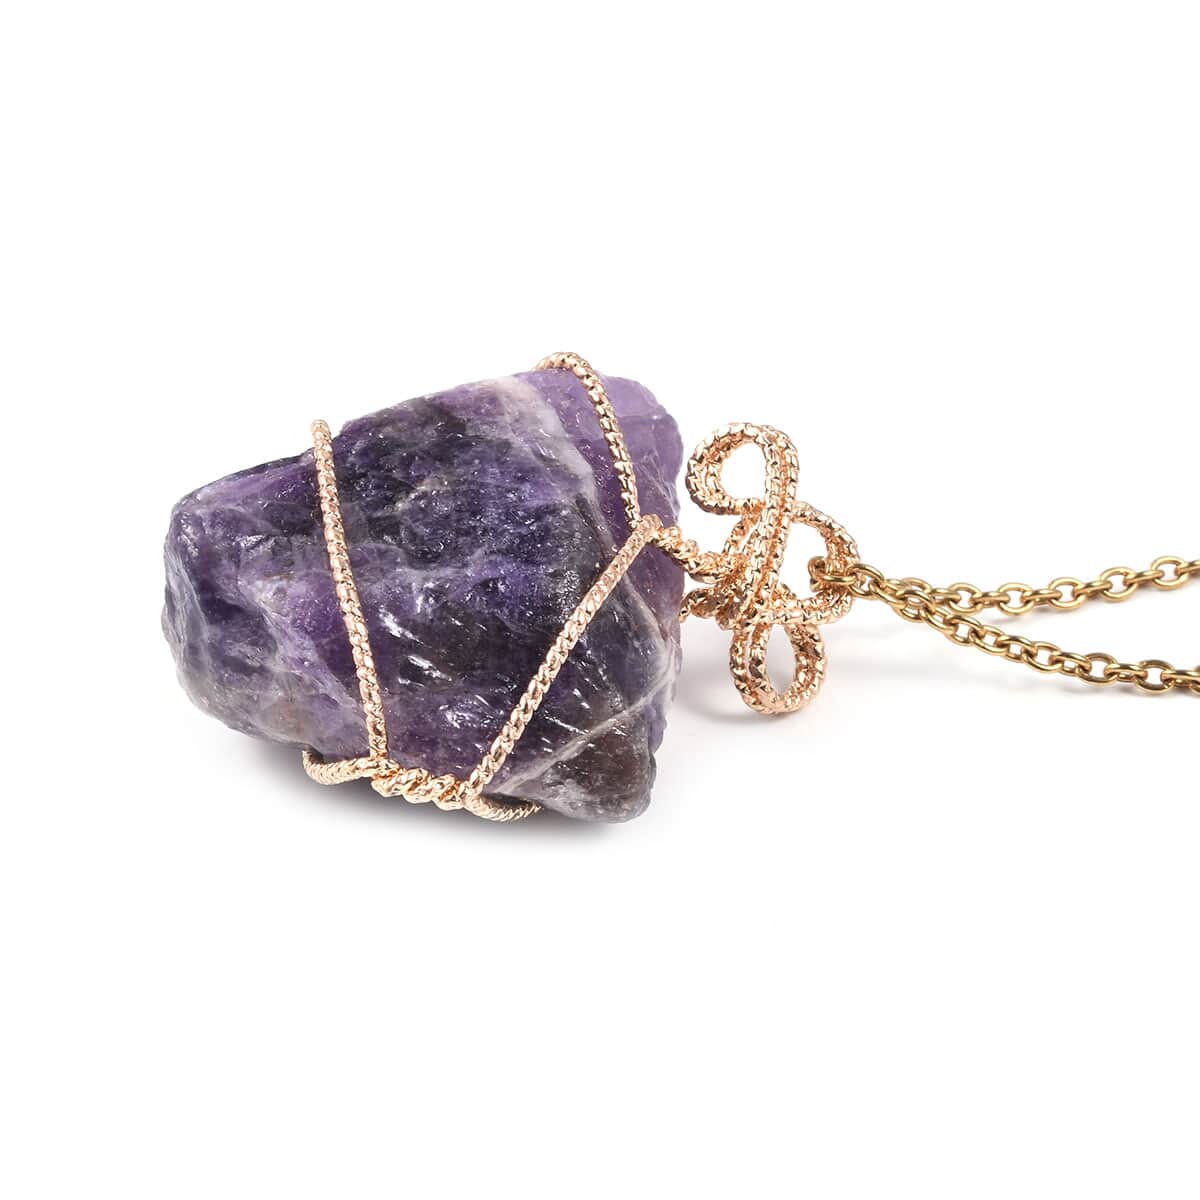 Set of 2 Amethyst and Galilea Rose Quartz Wire Wrapped Pendants Necklace 24 Inches in Goldtone 230.00 ctw  image number 3